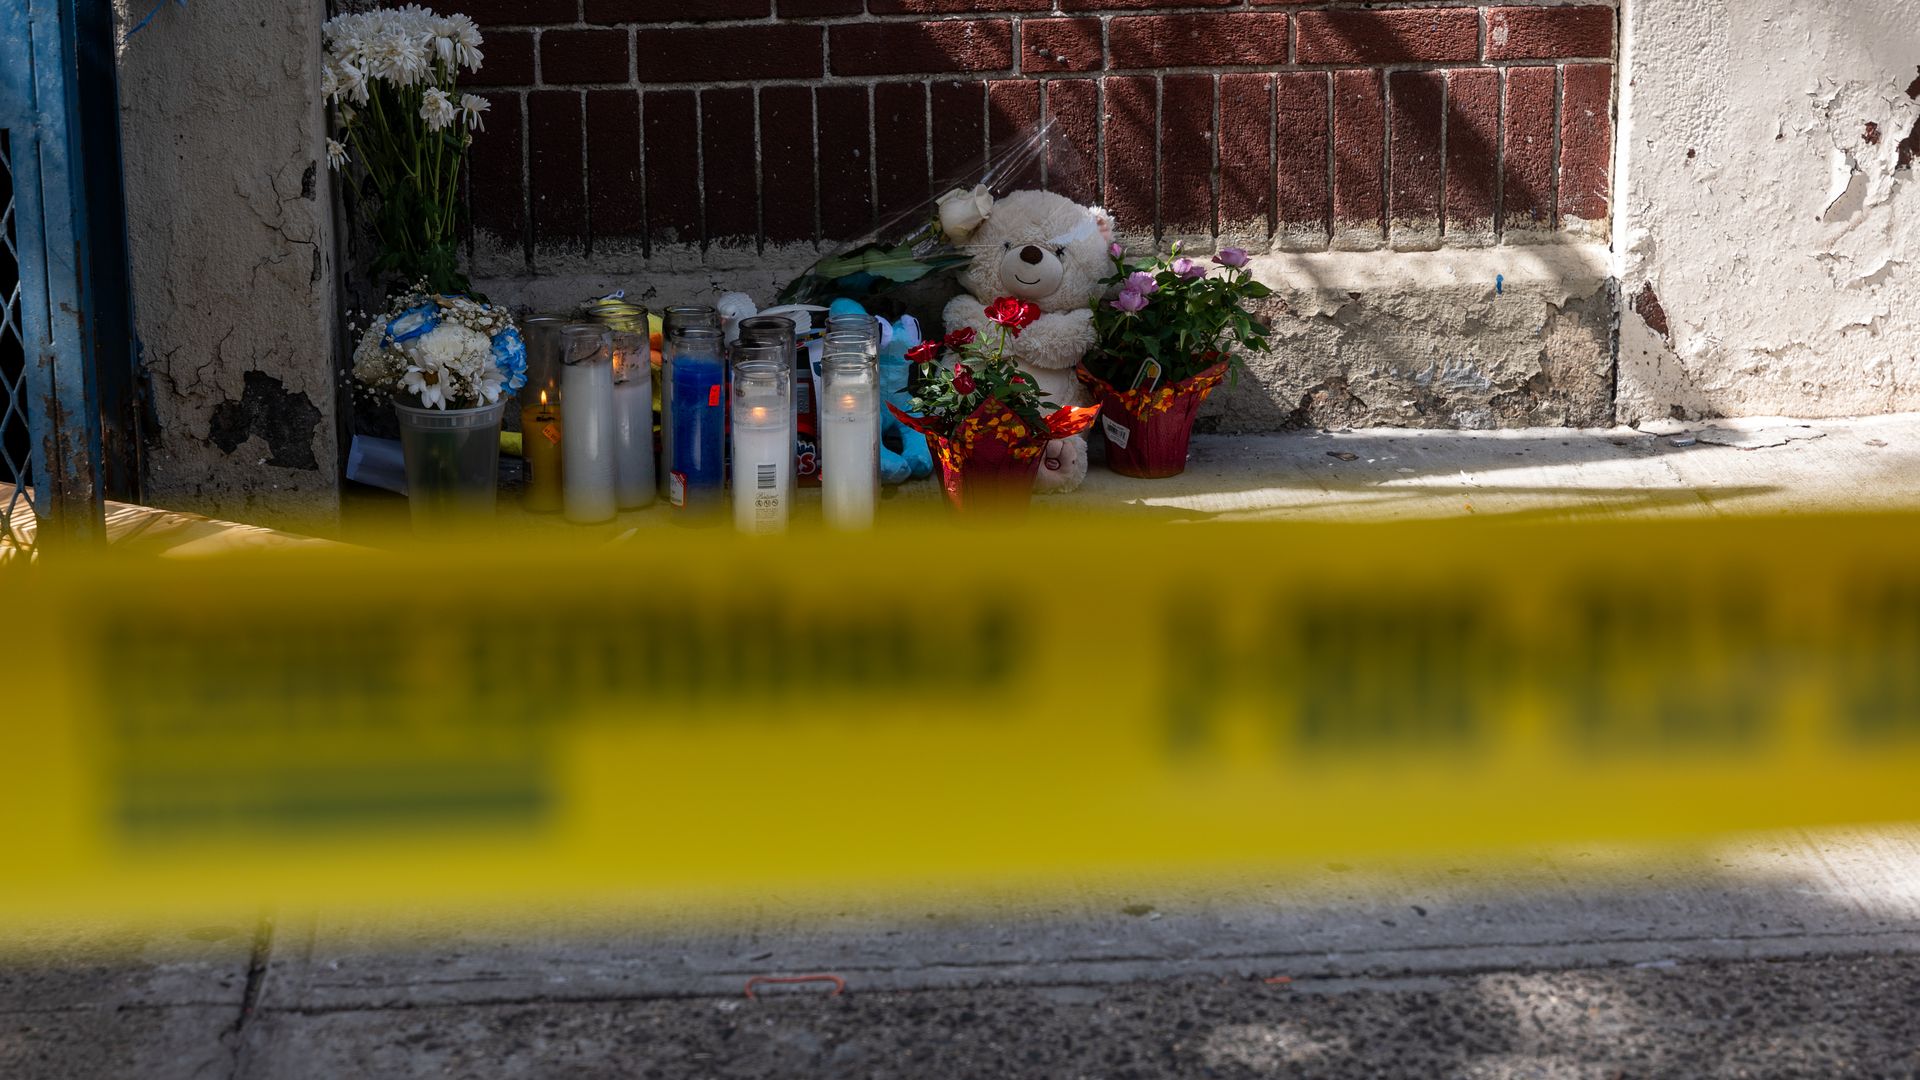 A photo of a makeshift memorial with policy tape in the foreground.